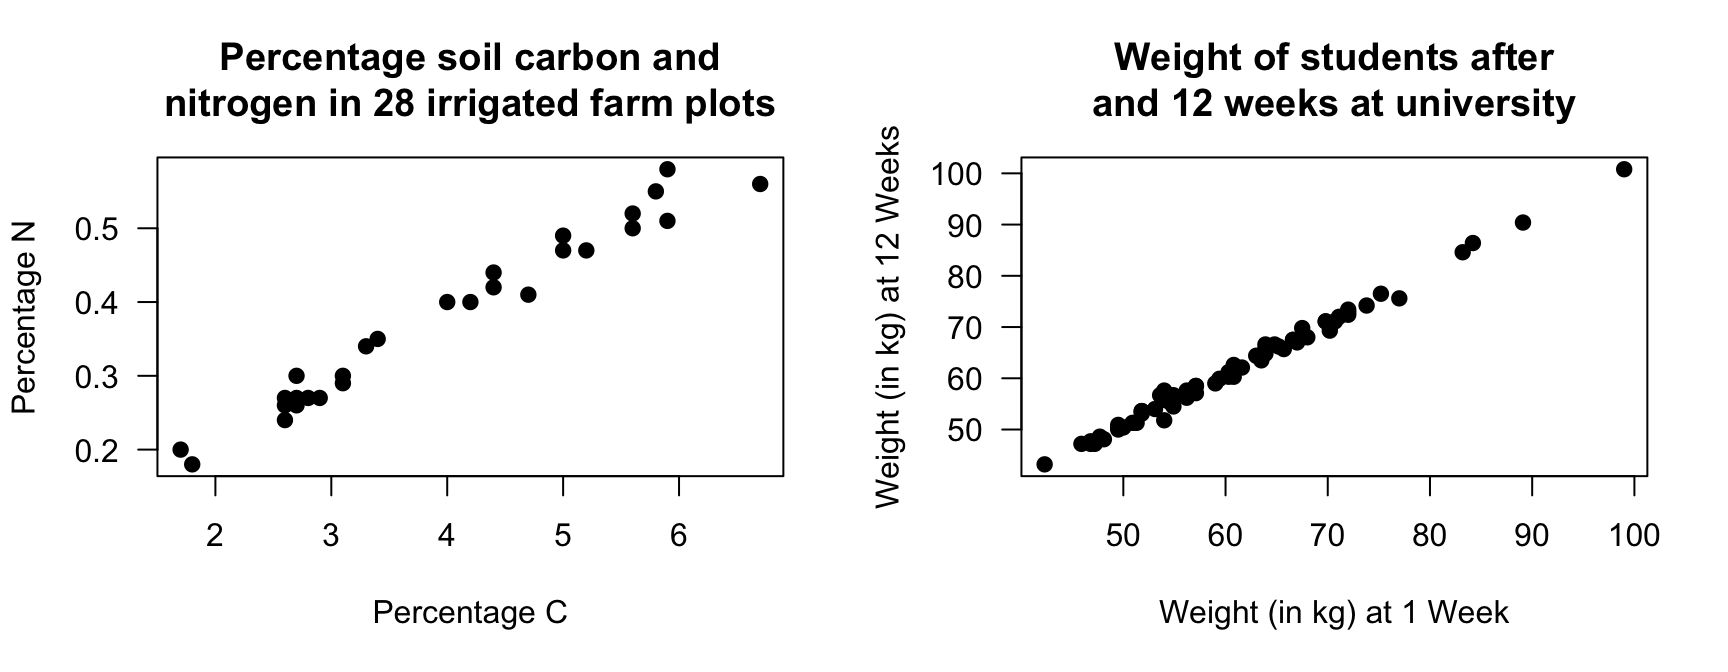 Left: the percentage N and percentage C in irrigated plots. Right: the weight of students in Week\ 1 and Week\ 12 of the university semester.